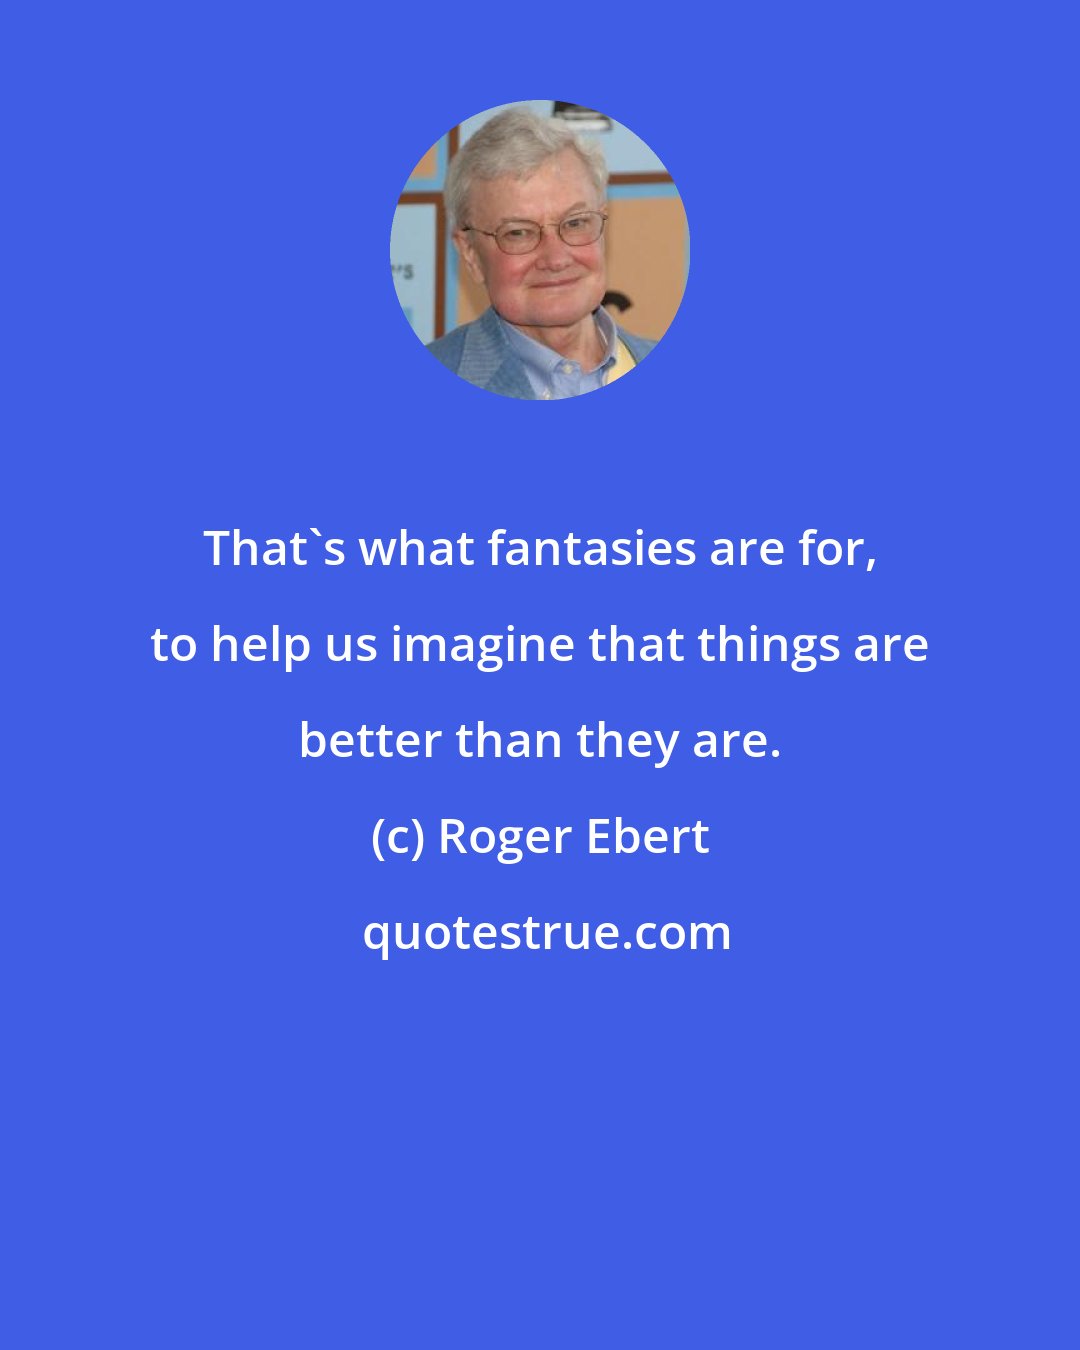 Roger Ebert: That's what fantasies are for, to help us imagine that things are better than they are.